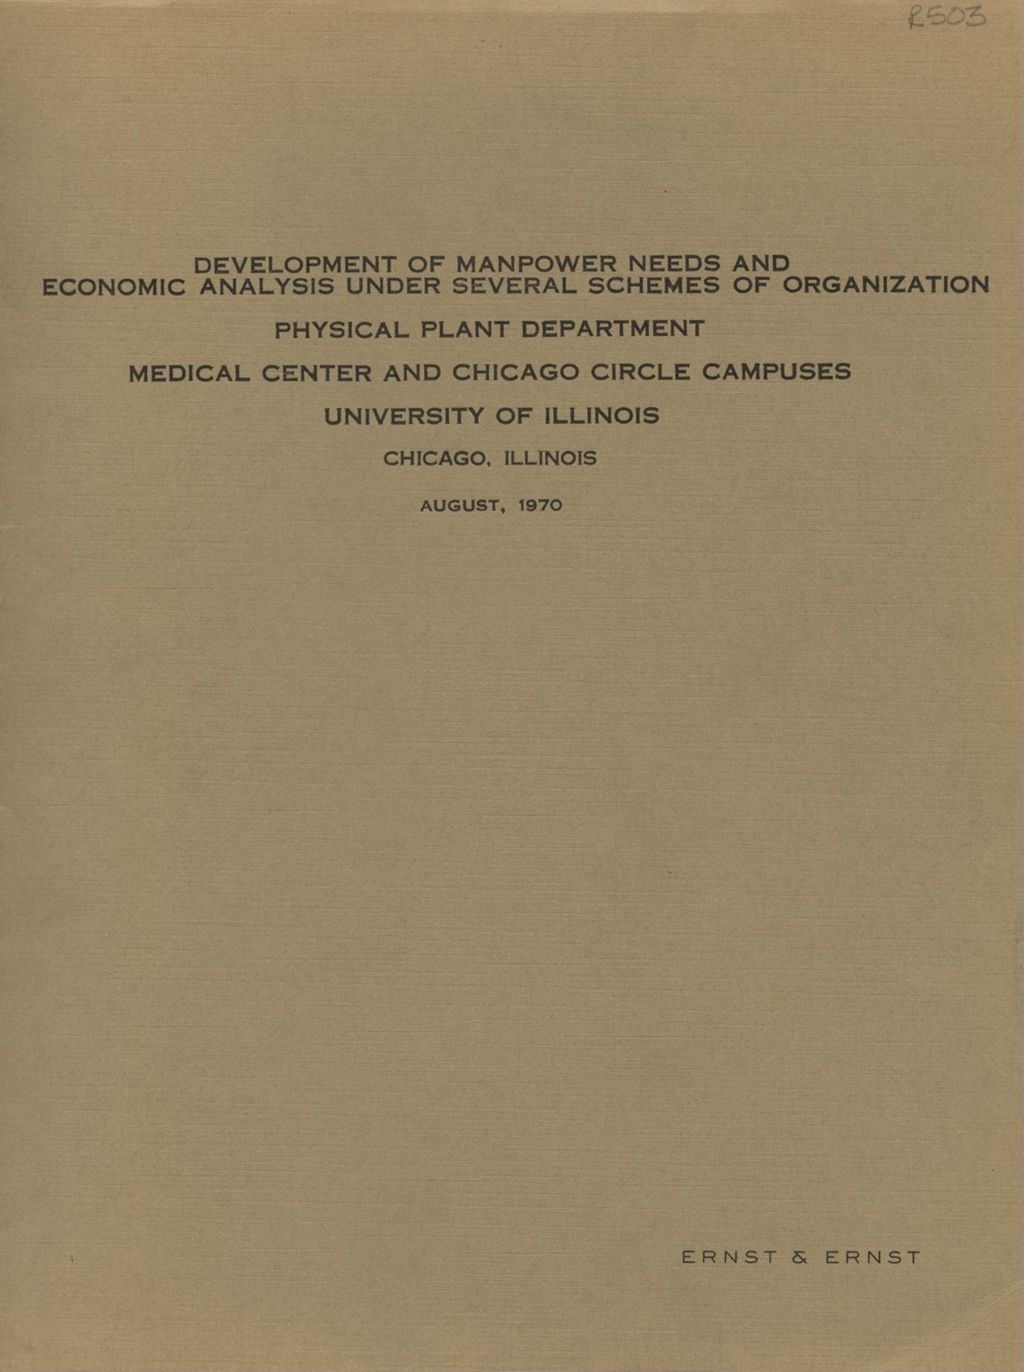 Development of Manpower Needs and Economic Analysis Under Several Schemes of Organization, Physical Plant Department, Medical Center and Chicago Circle Campuses, University of Illinois